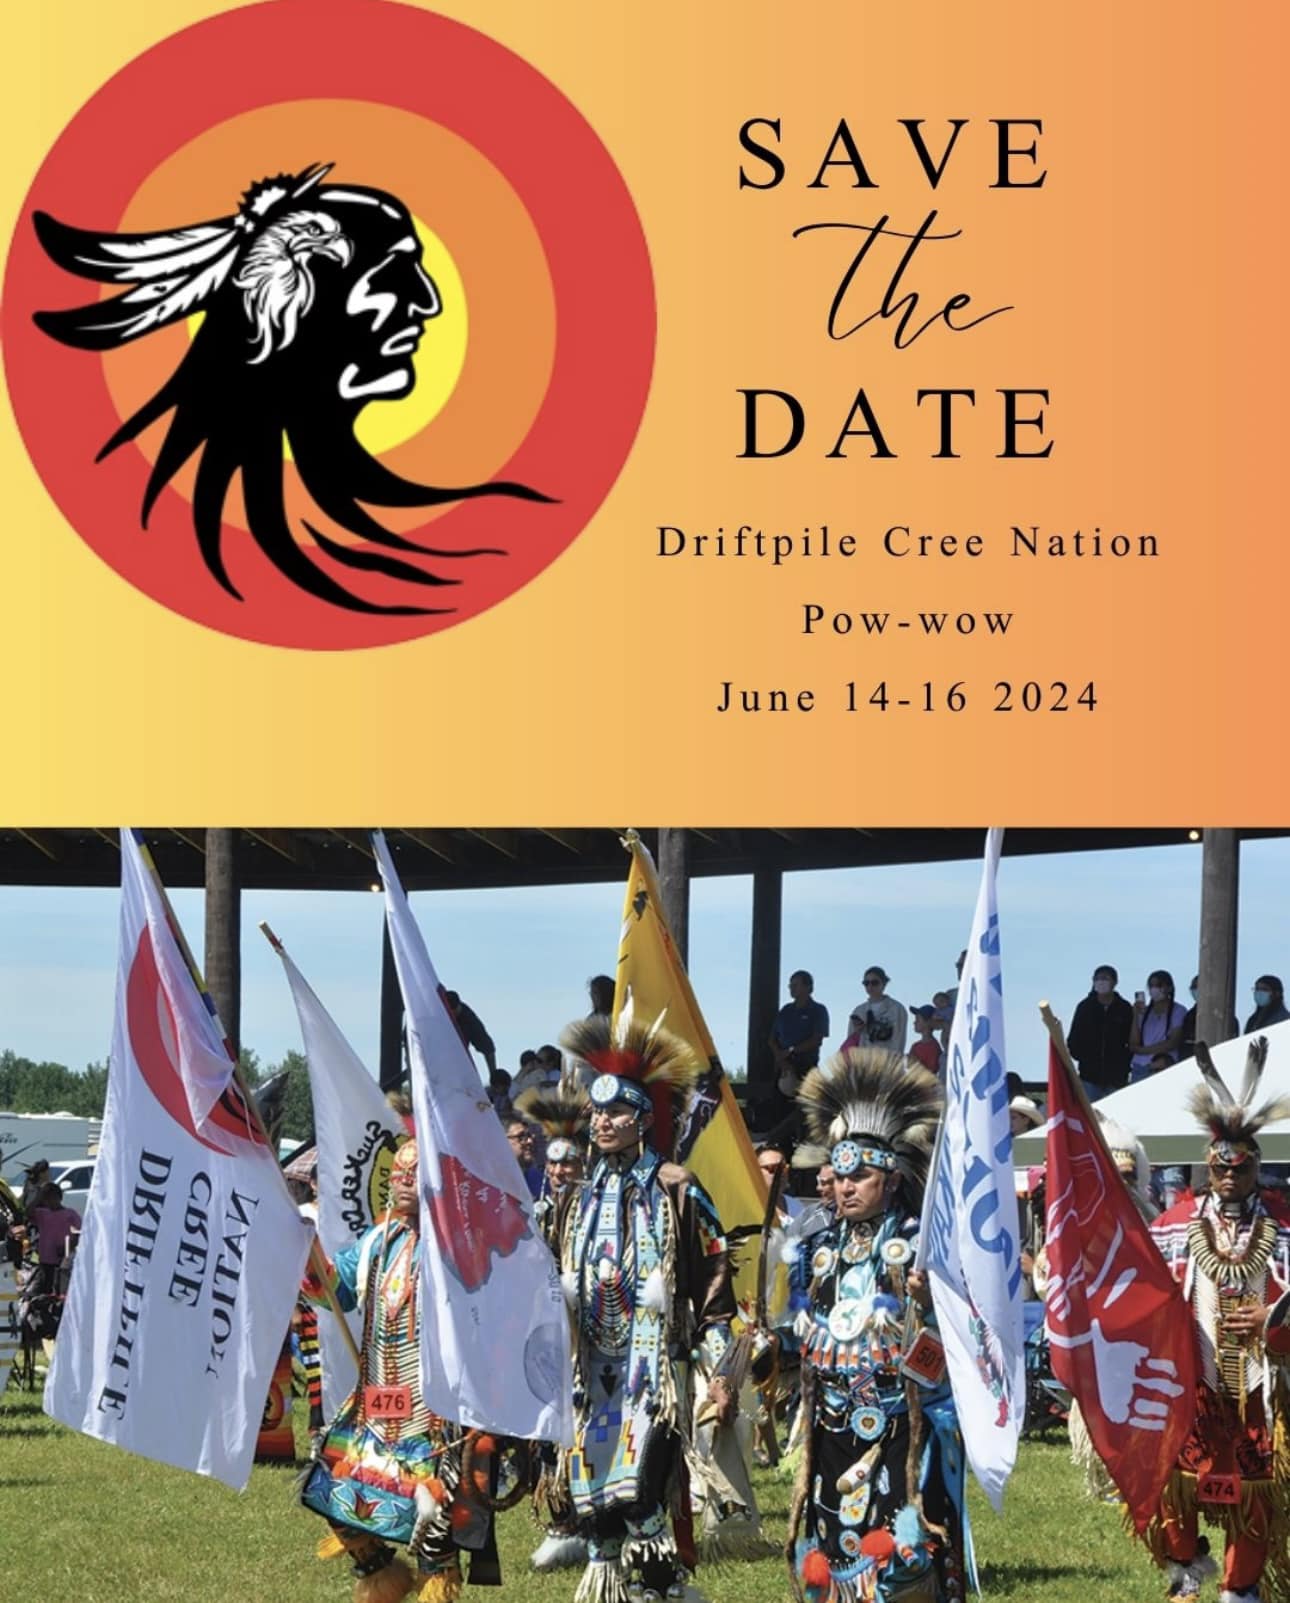 Save the date Driftpile Cree Nation Powwow 2024